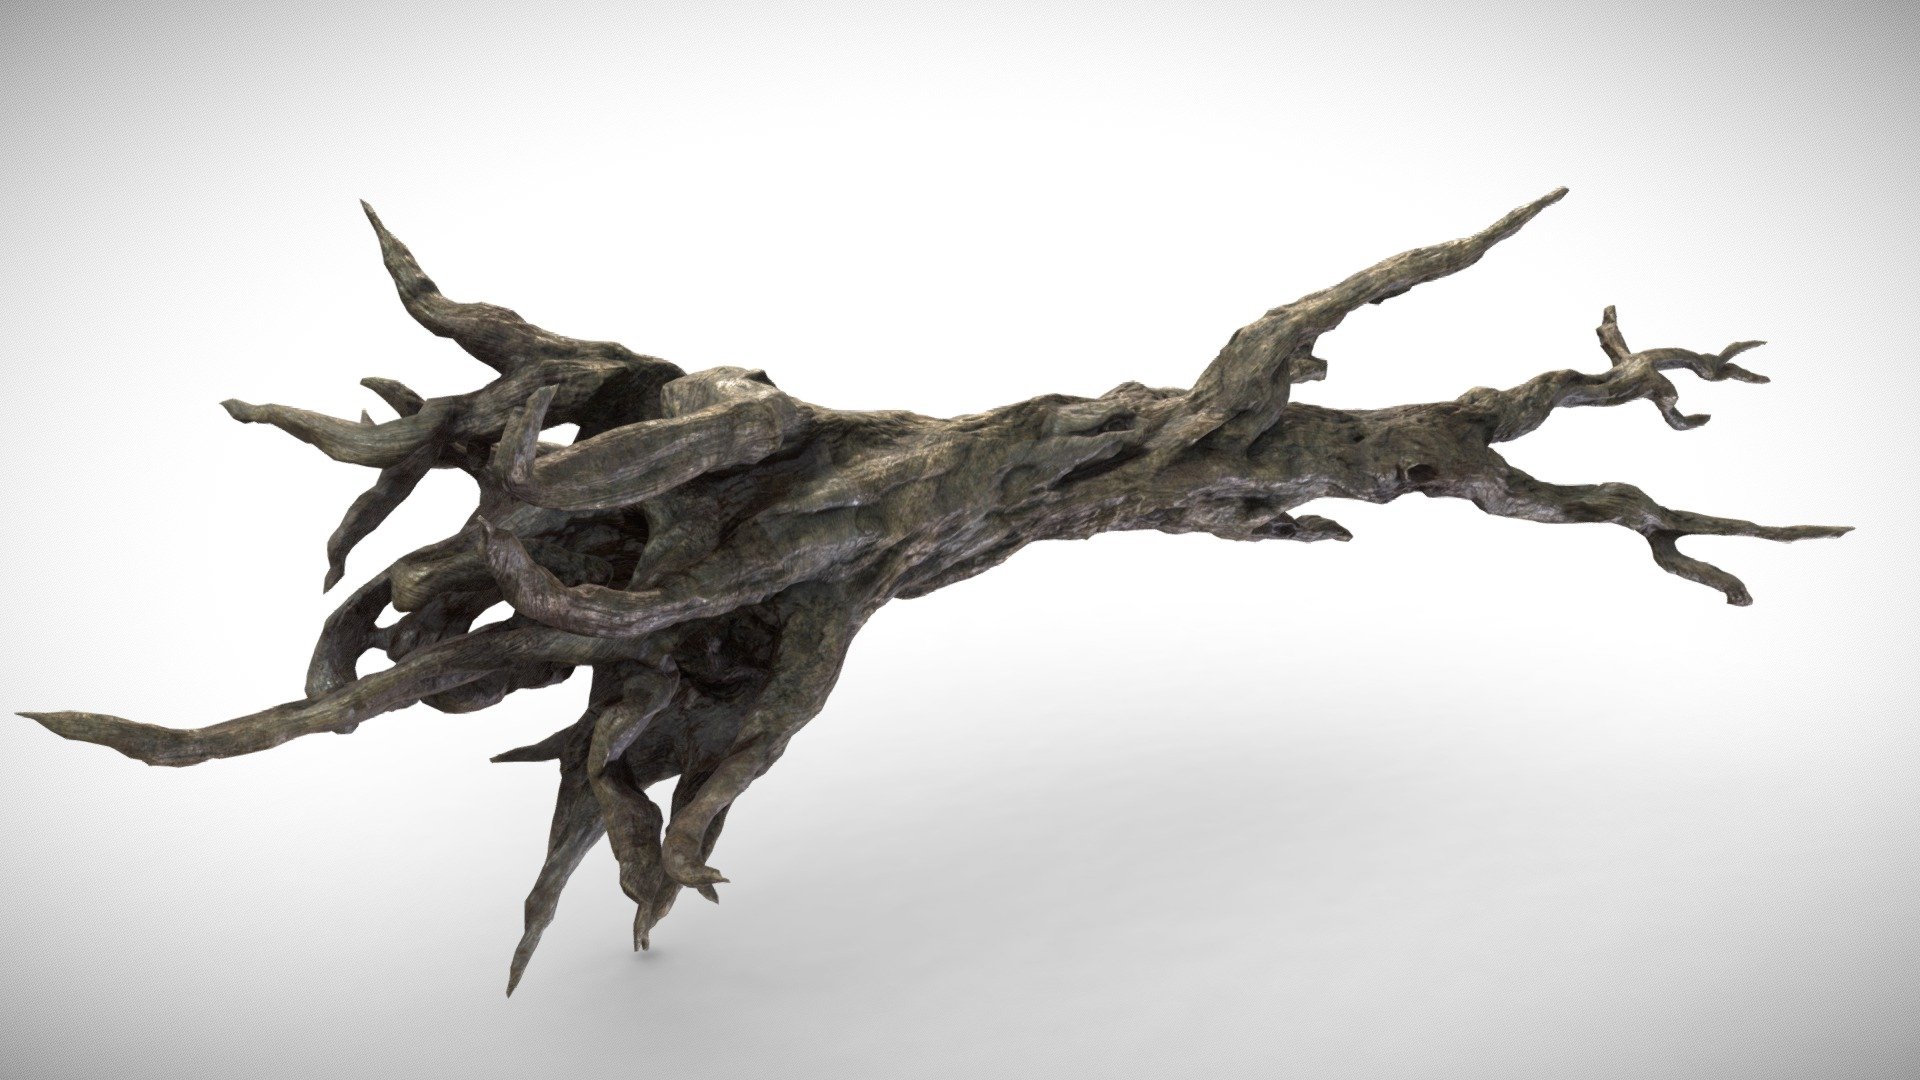 This Tree Mesh is made up of 1 UV Map, with 4096x4096 resolution.
Textures contained are:
- Diffuse
- Metallic
- Normal
- Roughness - Fantasy Forest Tree - Fallen Dead Roots A - 4k - Buy Royalty Free 3D model by Davis3D 3d model